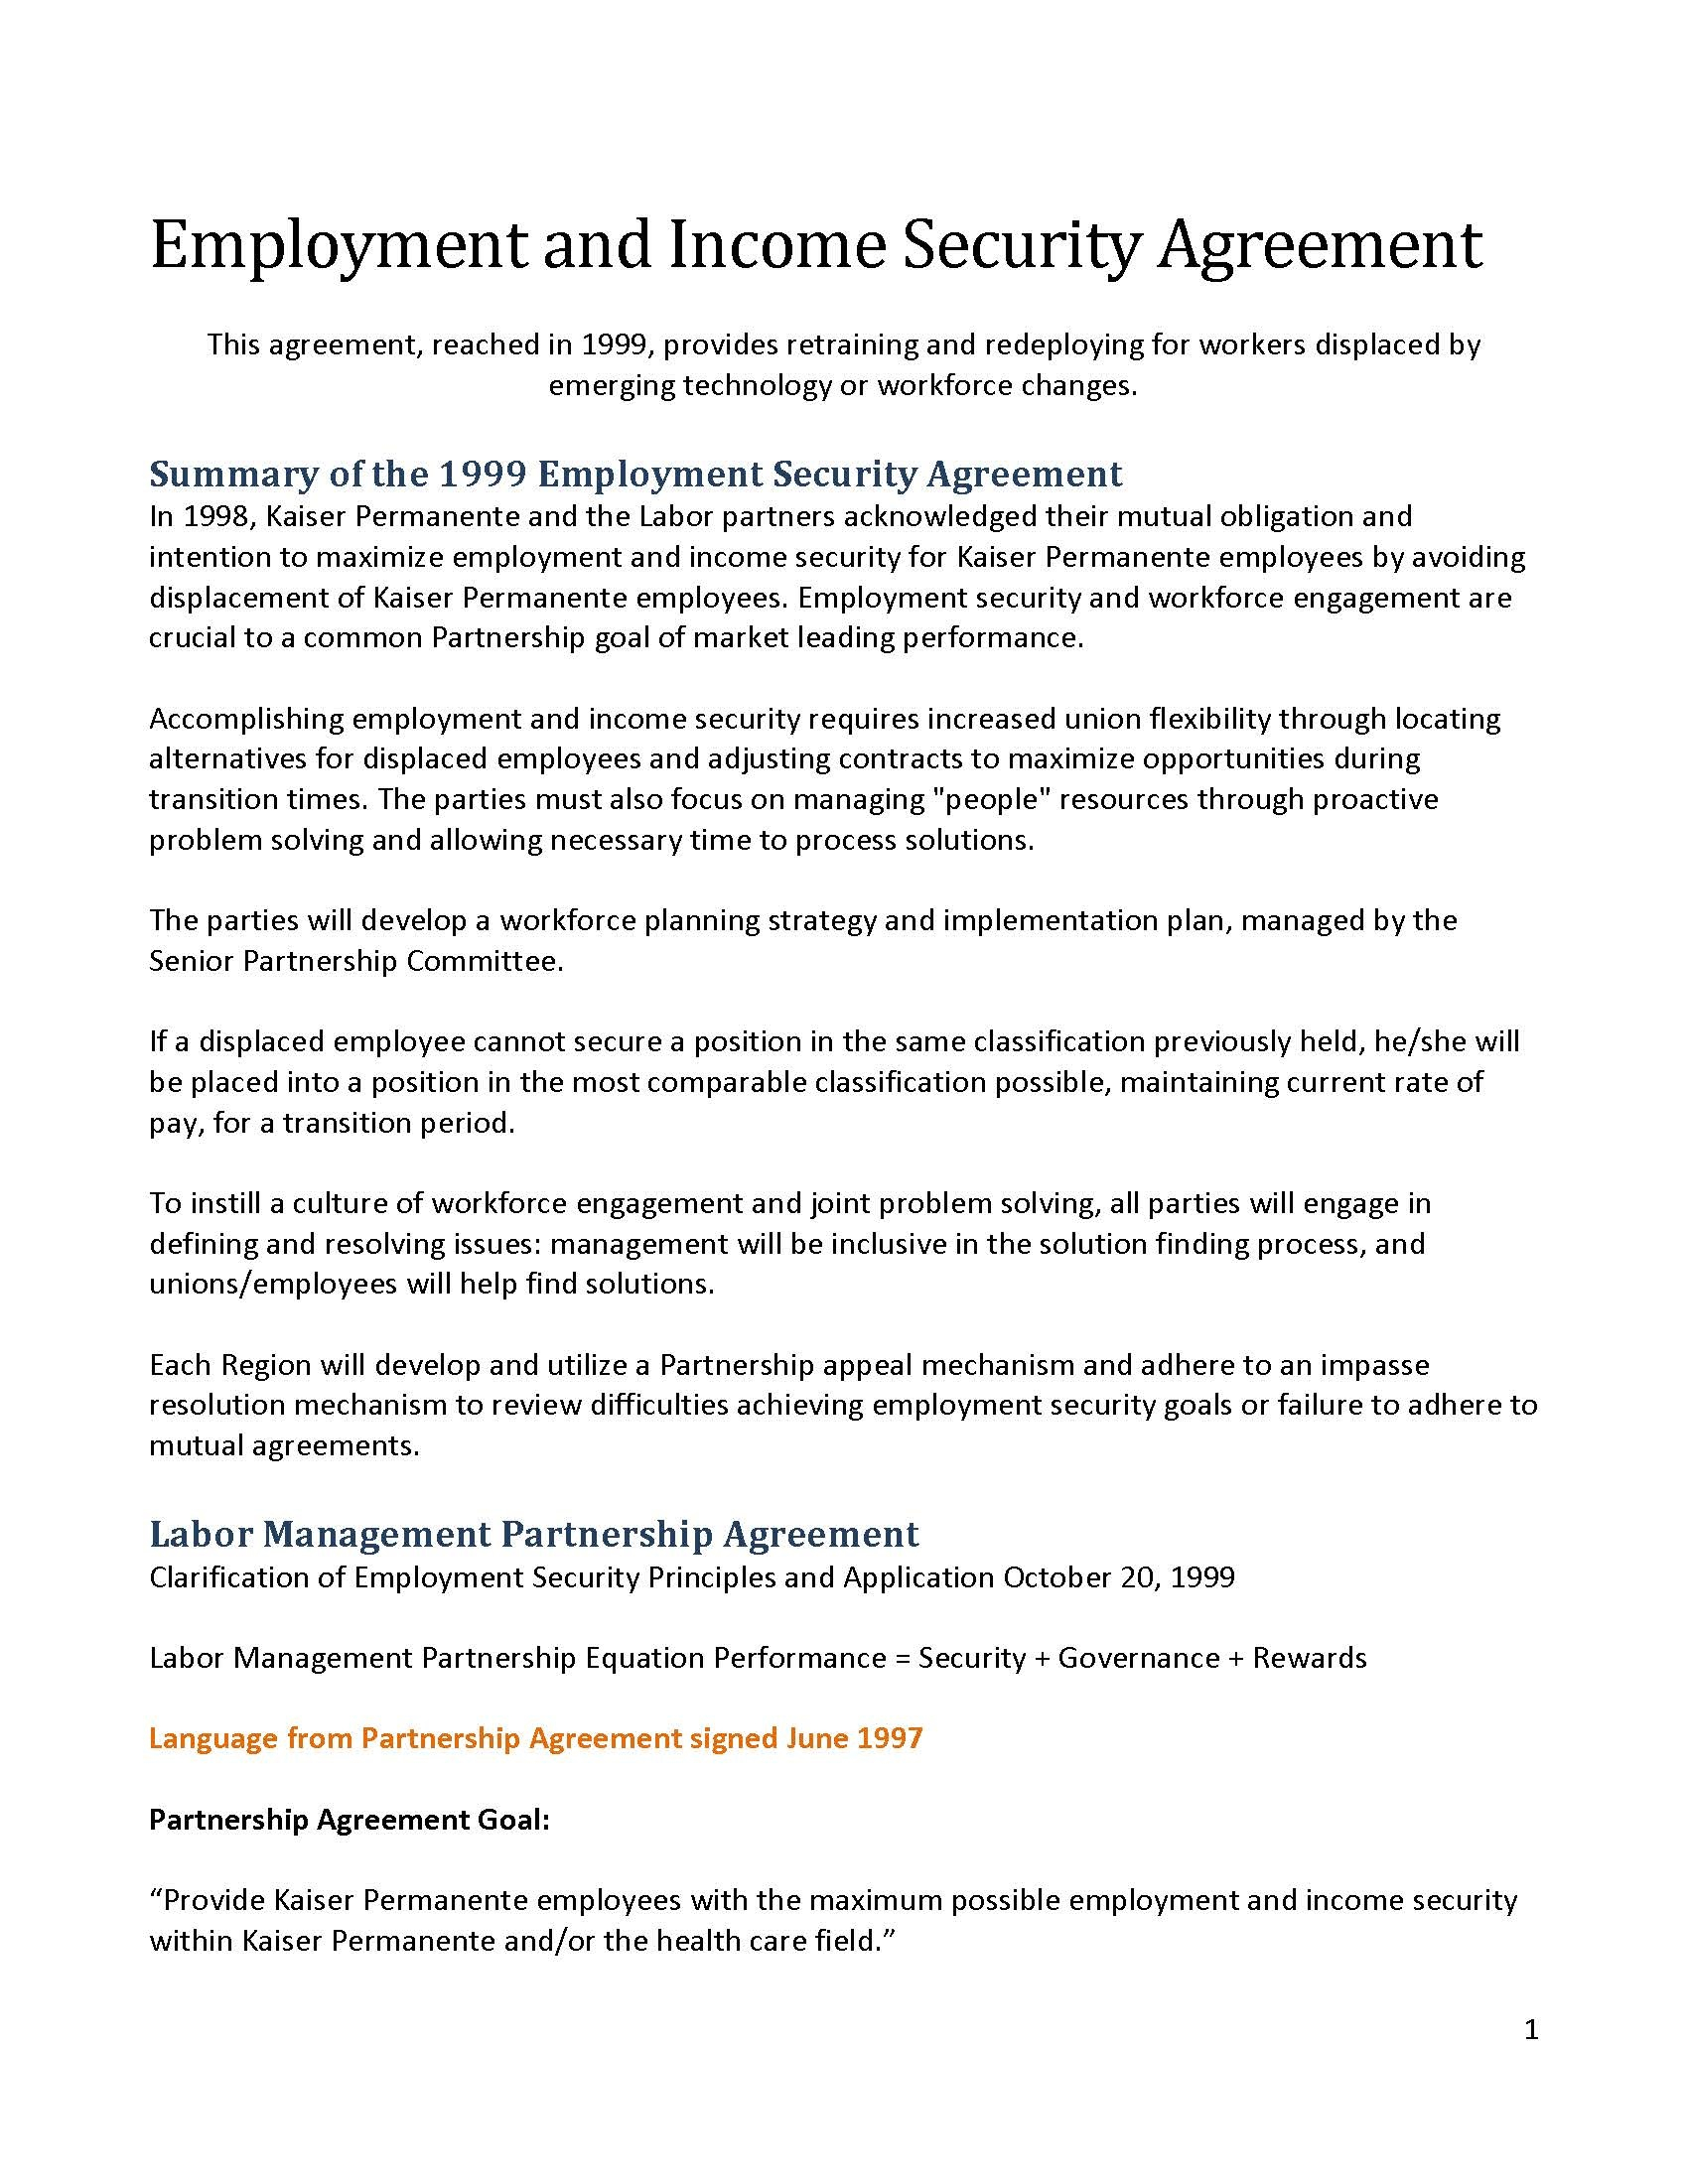 Partnership Agreement Pdf Download Employment And Income Security Agreement Labor Management Partnership